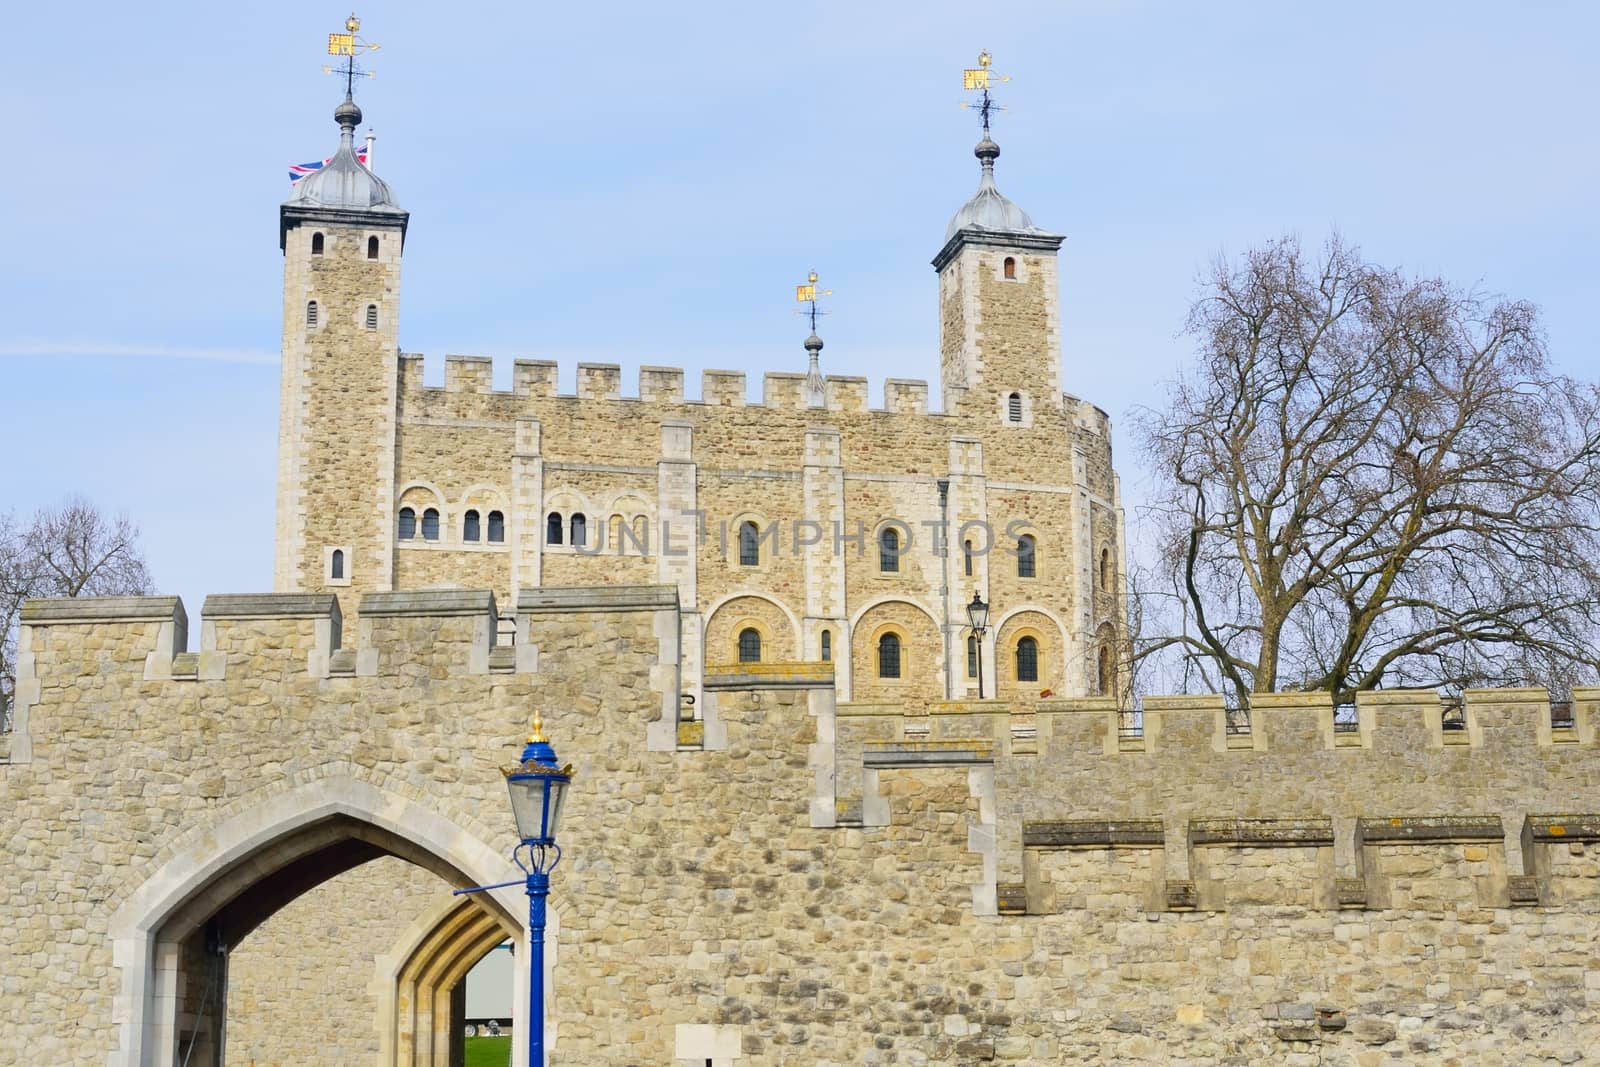 Tower of London from South Bank